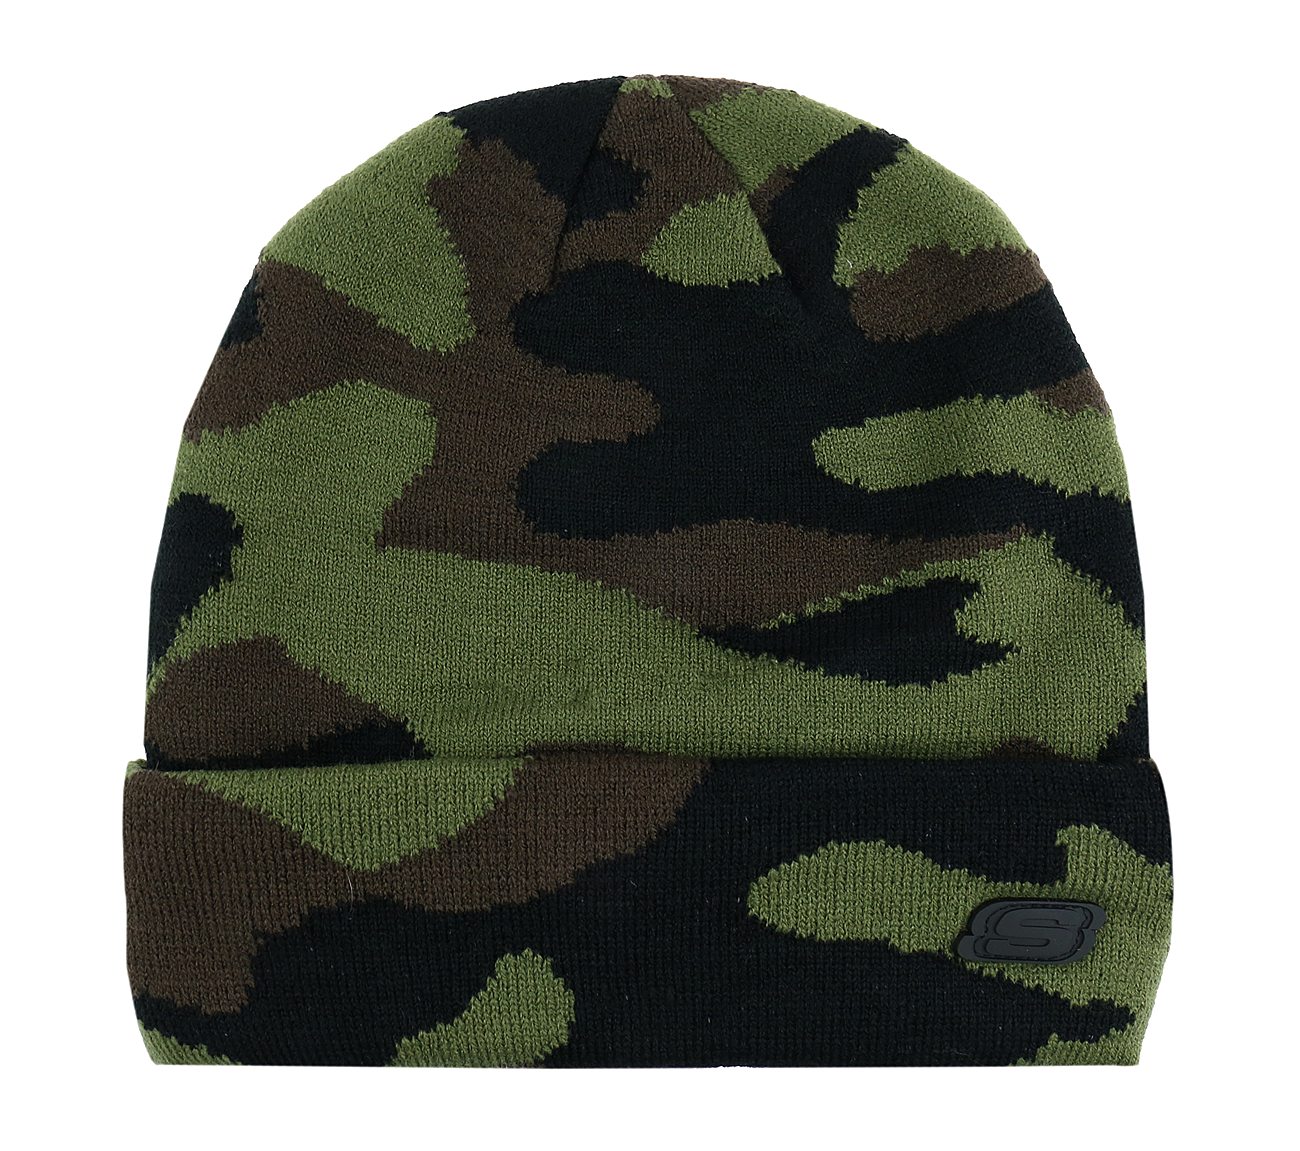 Buy SKECHERS Camo Cuff Beanie Hat Cold Weather Gear Shoes